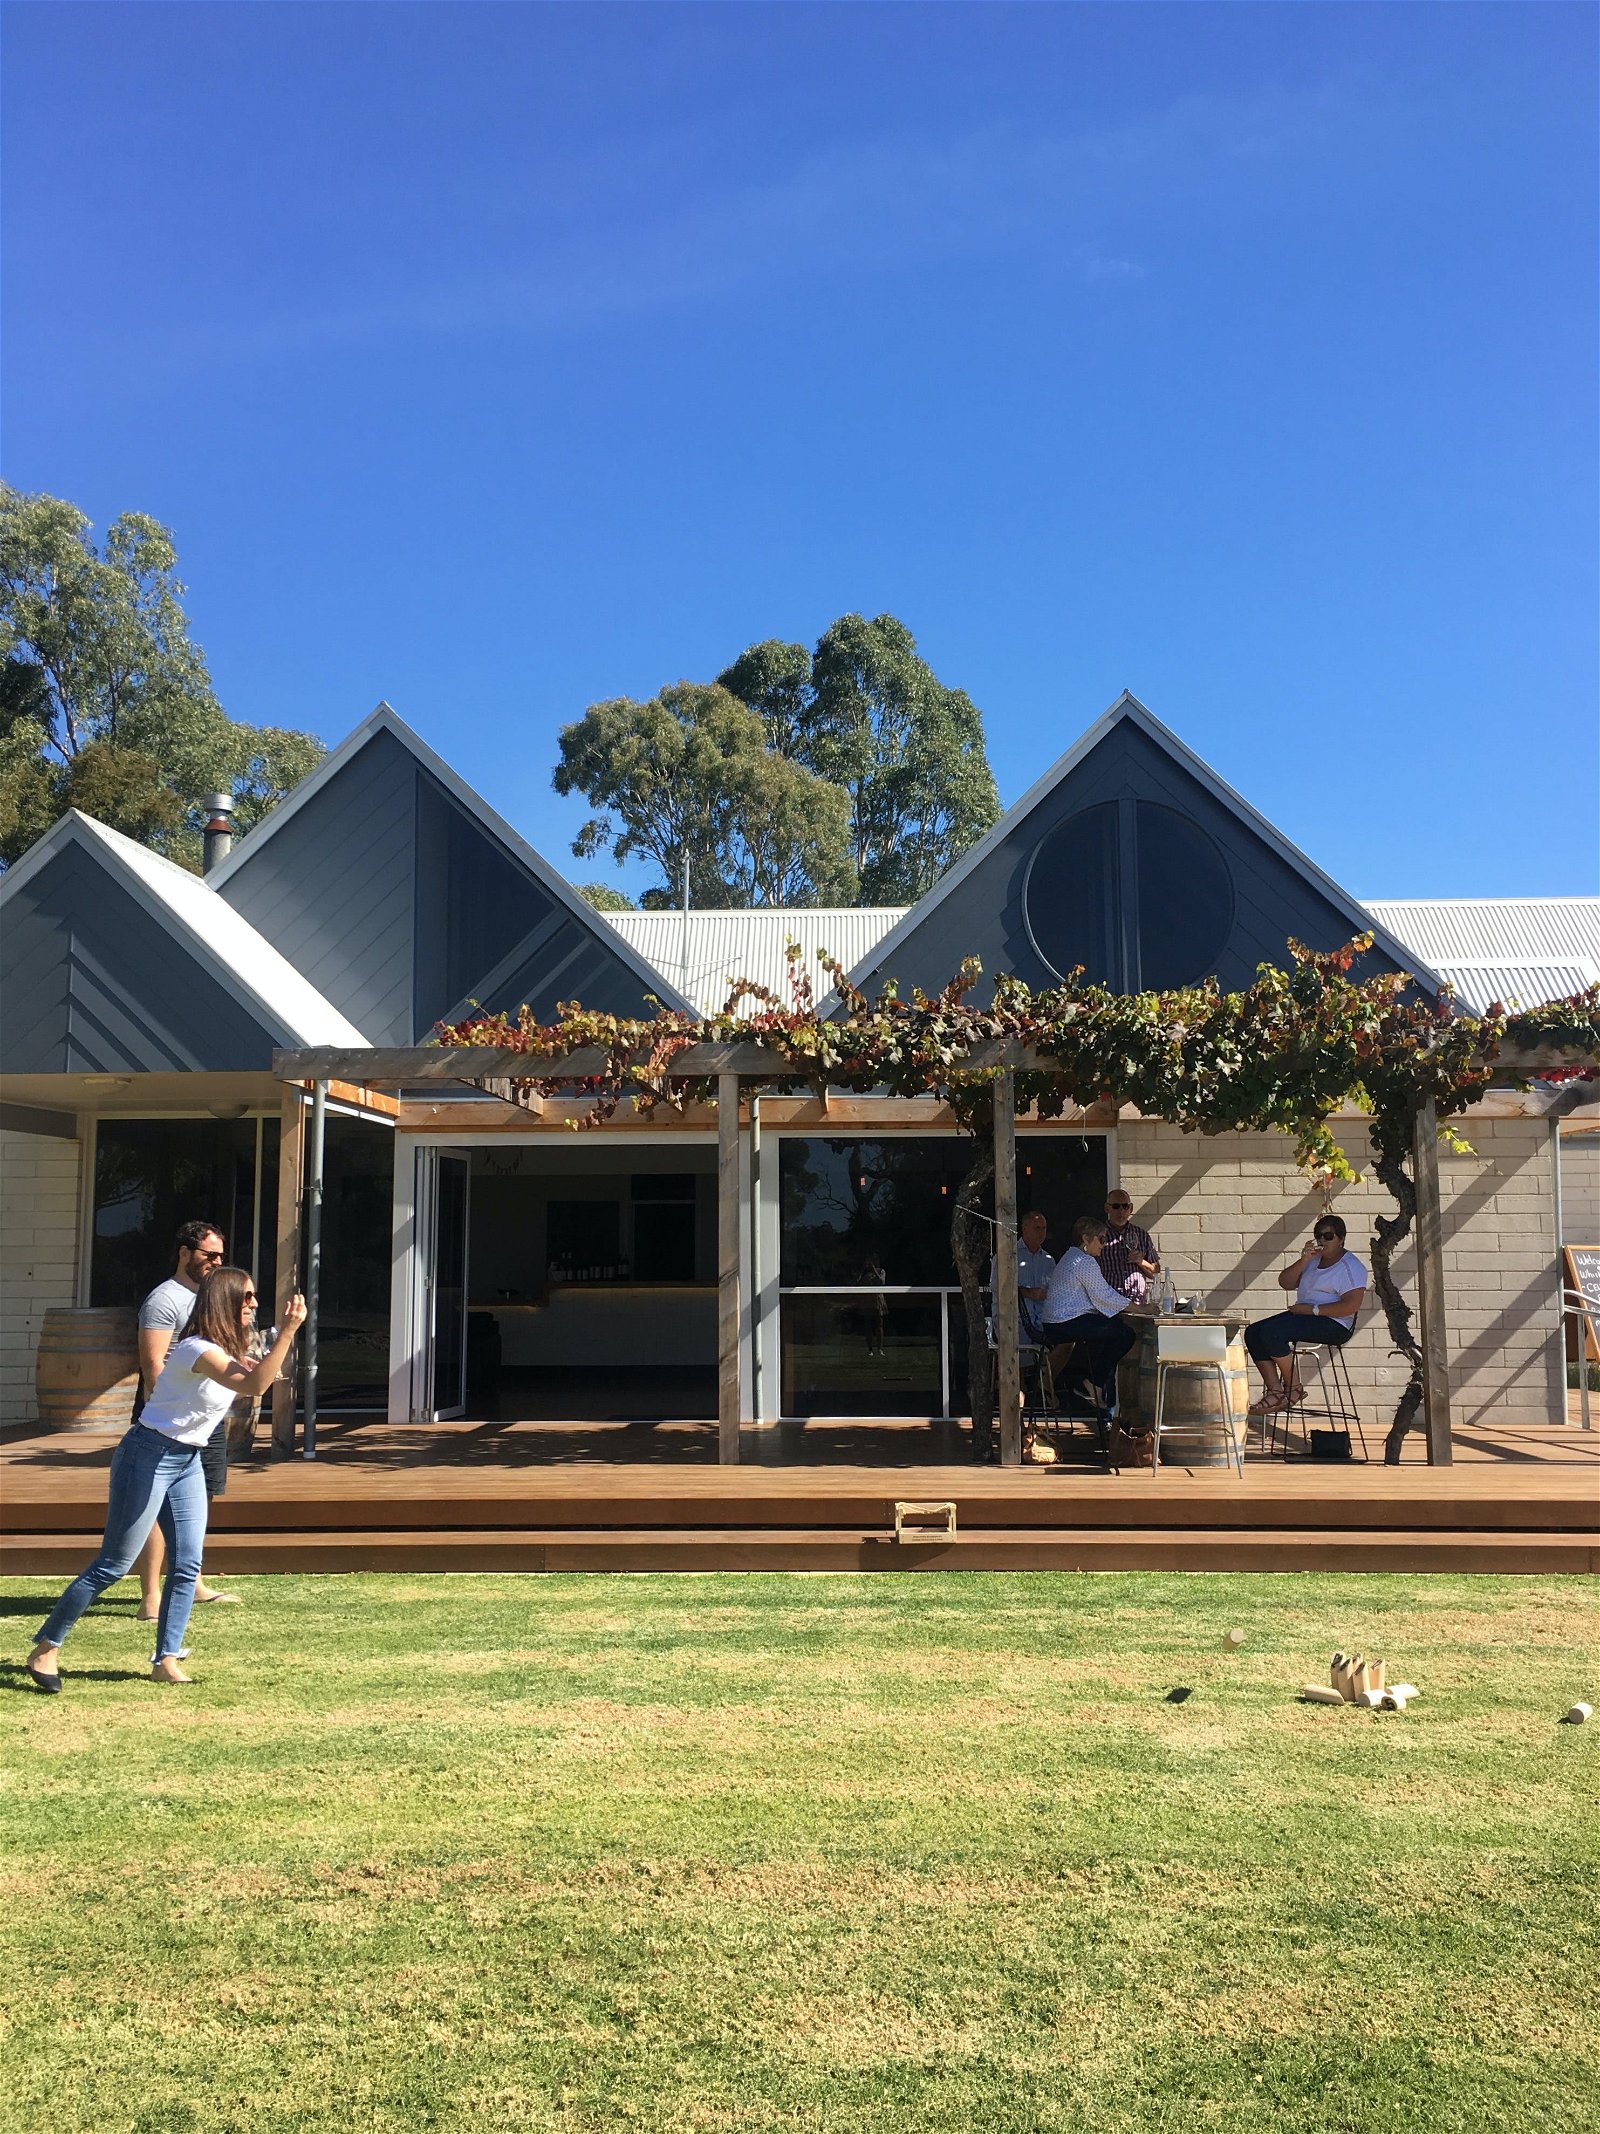 Whistle Post Cellar Door - Northern Rivers Accommodation